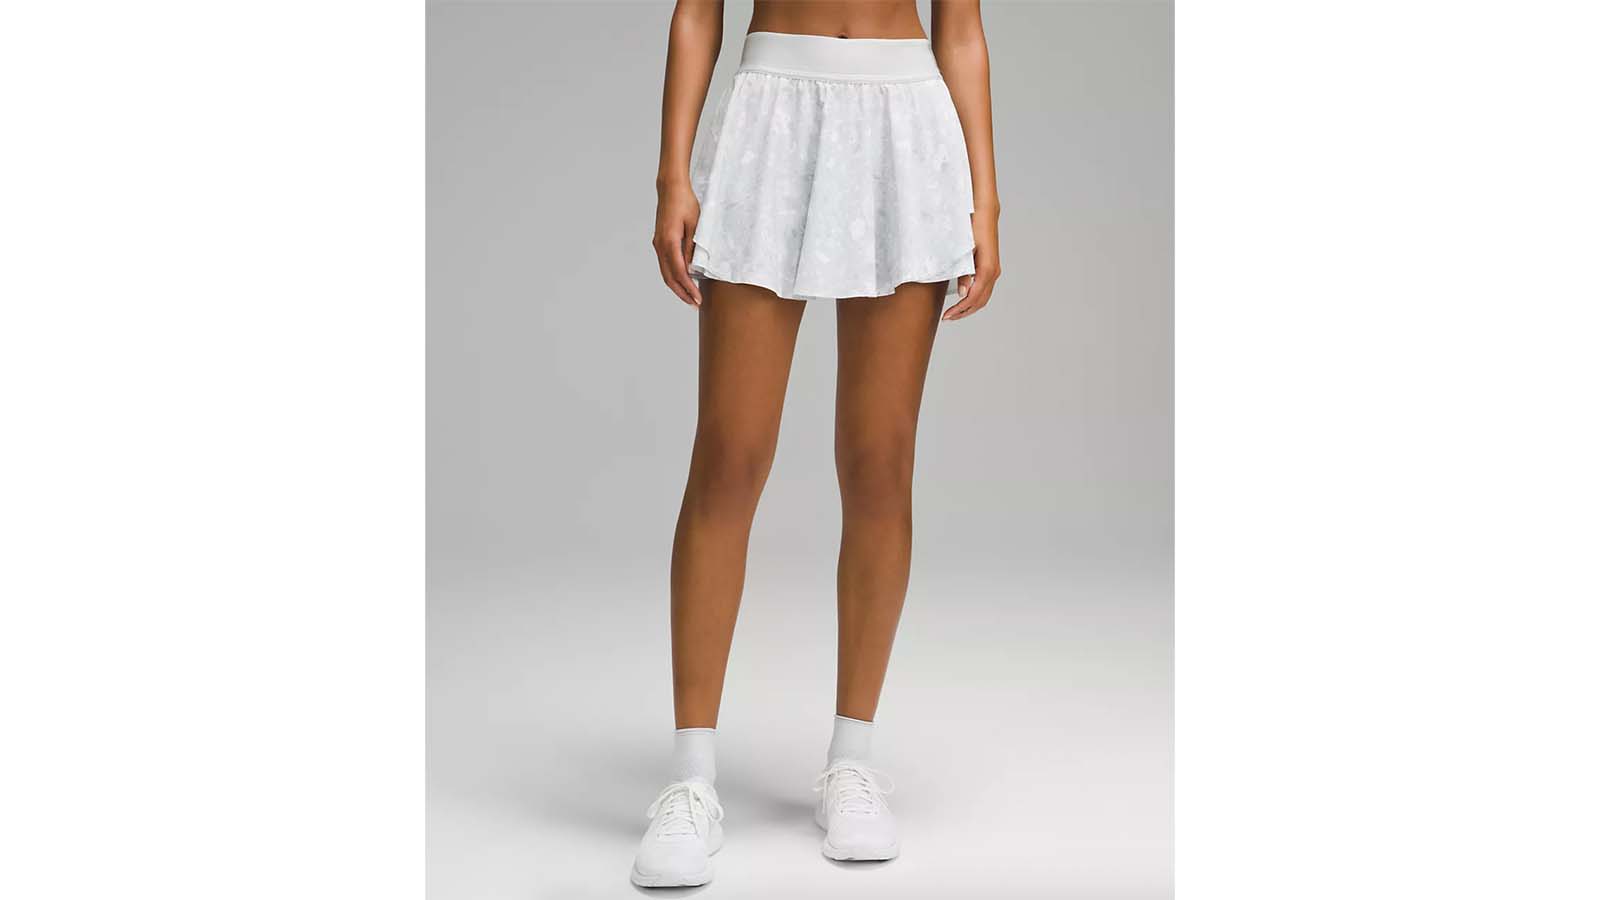 Target Is Selling a $24 High-Rise Flowy Skort That's So Similar to Lululemon,  and Fans Are Buying Multiple at a Time, Clayton News Parade Partner  Content